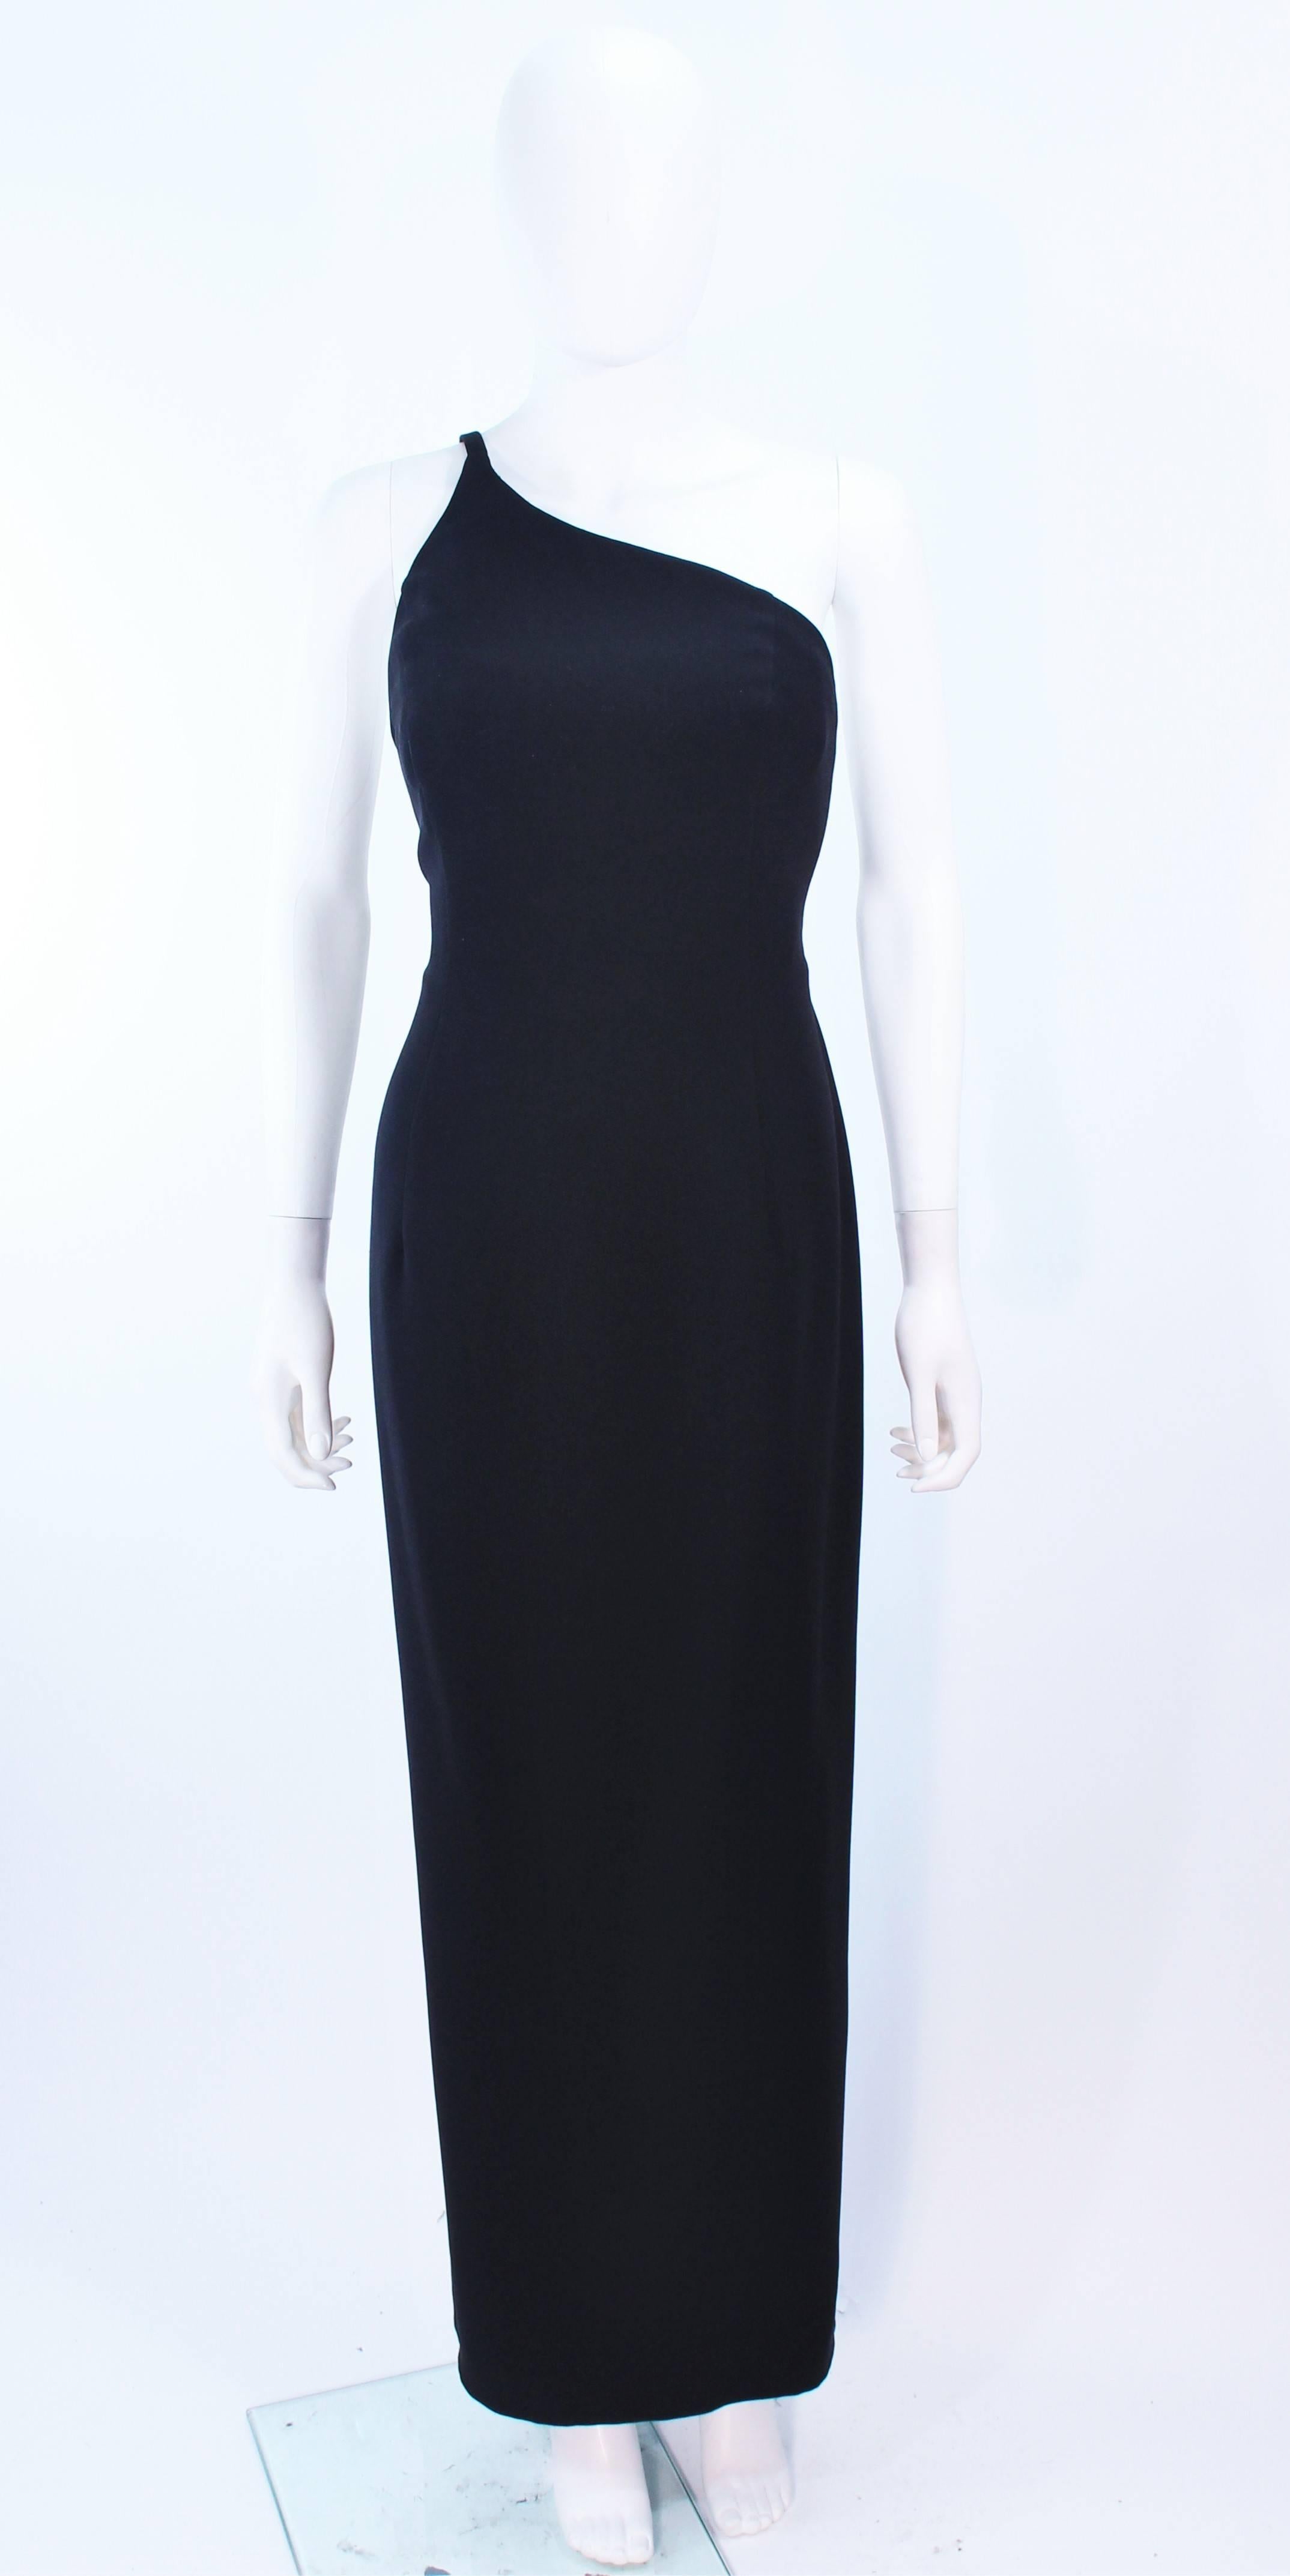 This Giorgio Armani gown is composed of a black silk crepe. Features a one shoulder style. There is a center back zipper closure, with interior boned bustier. In excellent vintage condition.

**Please cross-reference measurements for personal